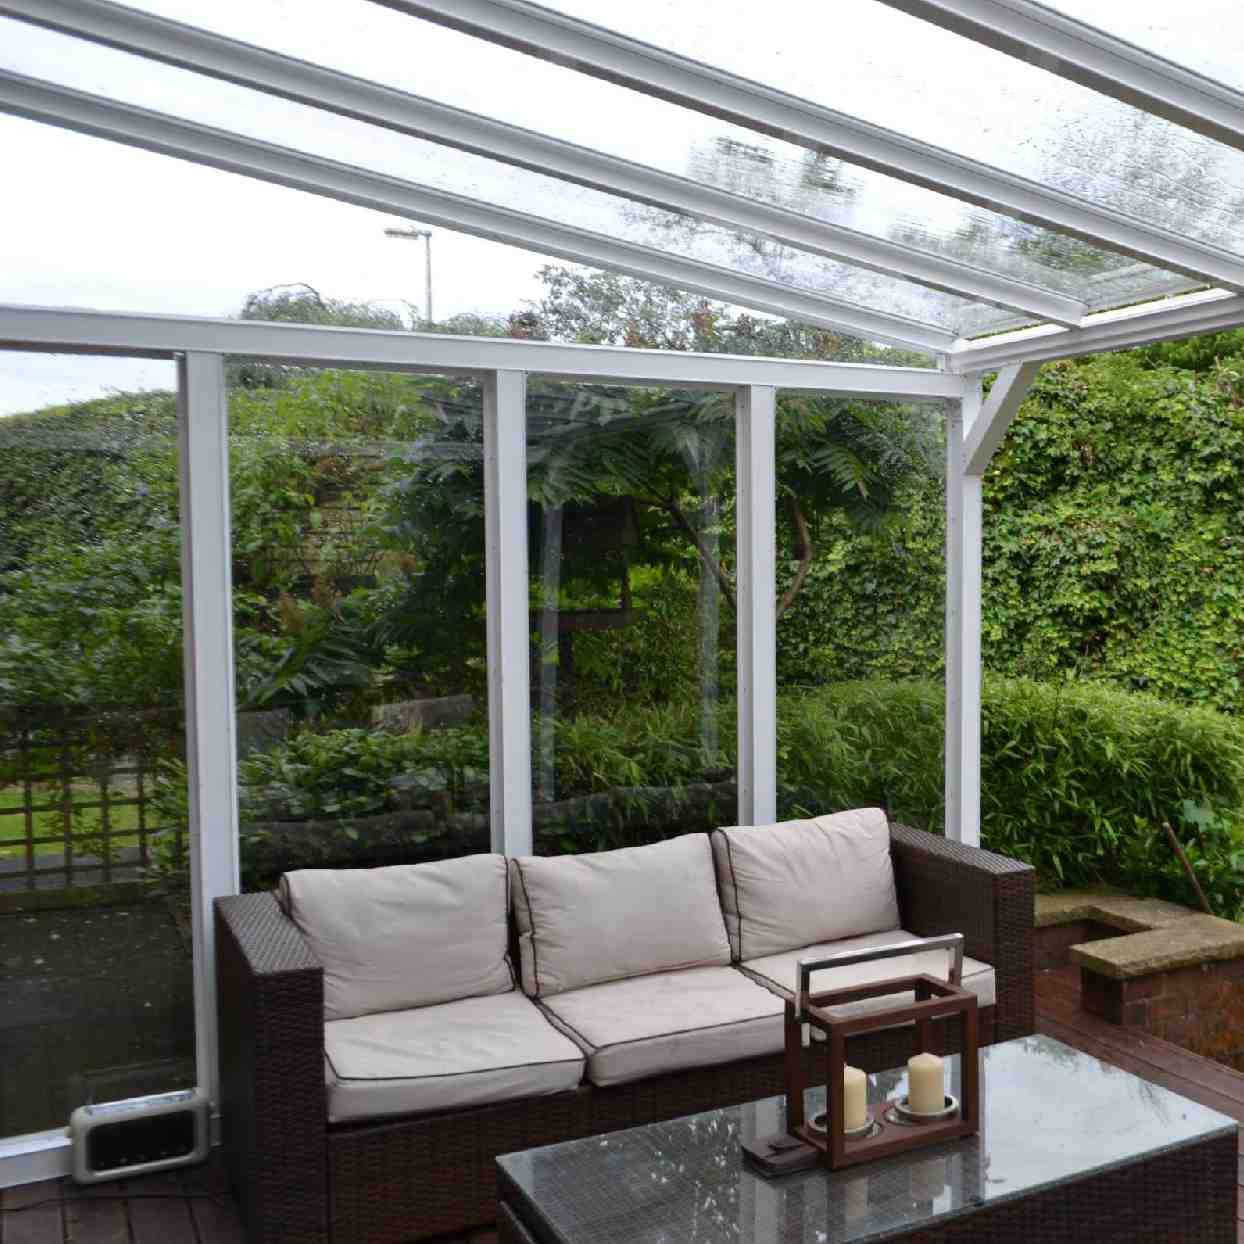 Buy Omega Verandah White with 16mm Polycarbonate Glazing - 9.9m (W) x 4.0m (P), (5) Supporting Posts online today